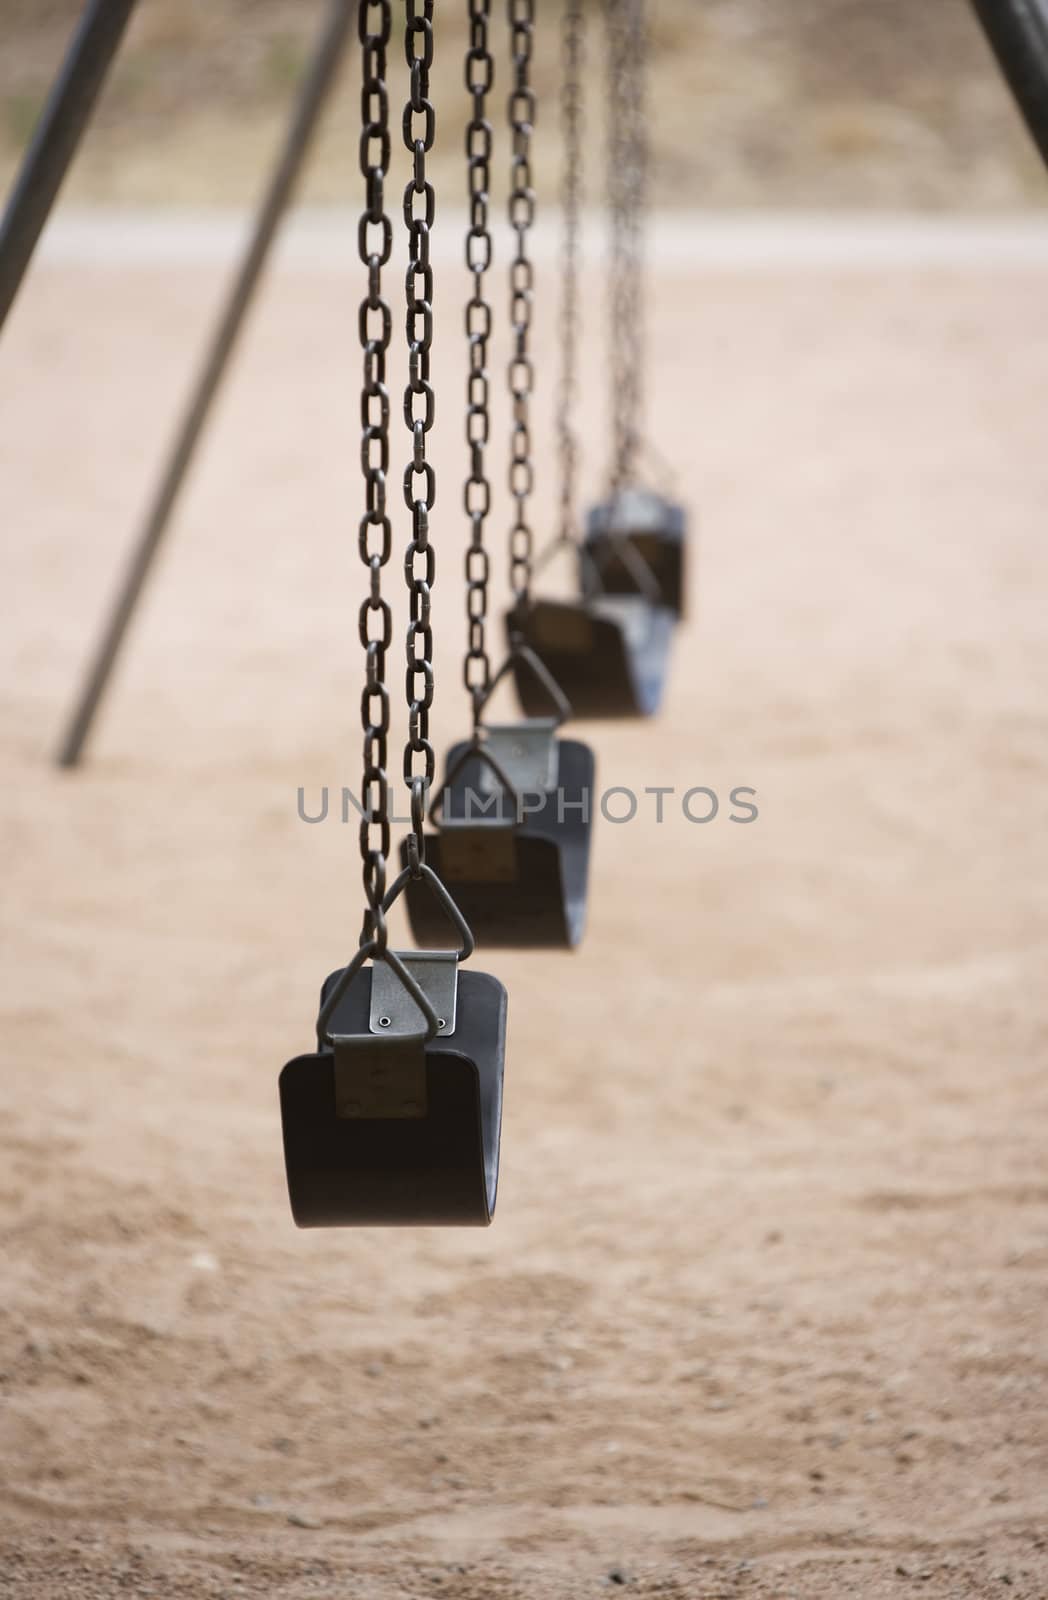 Playground Swings by Creatista